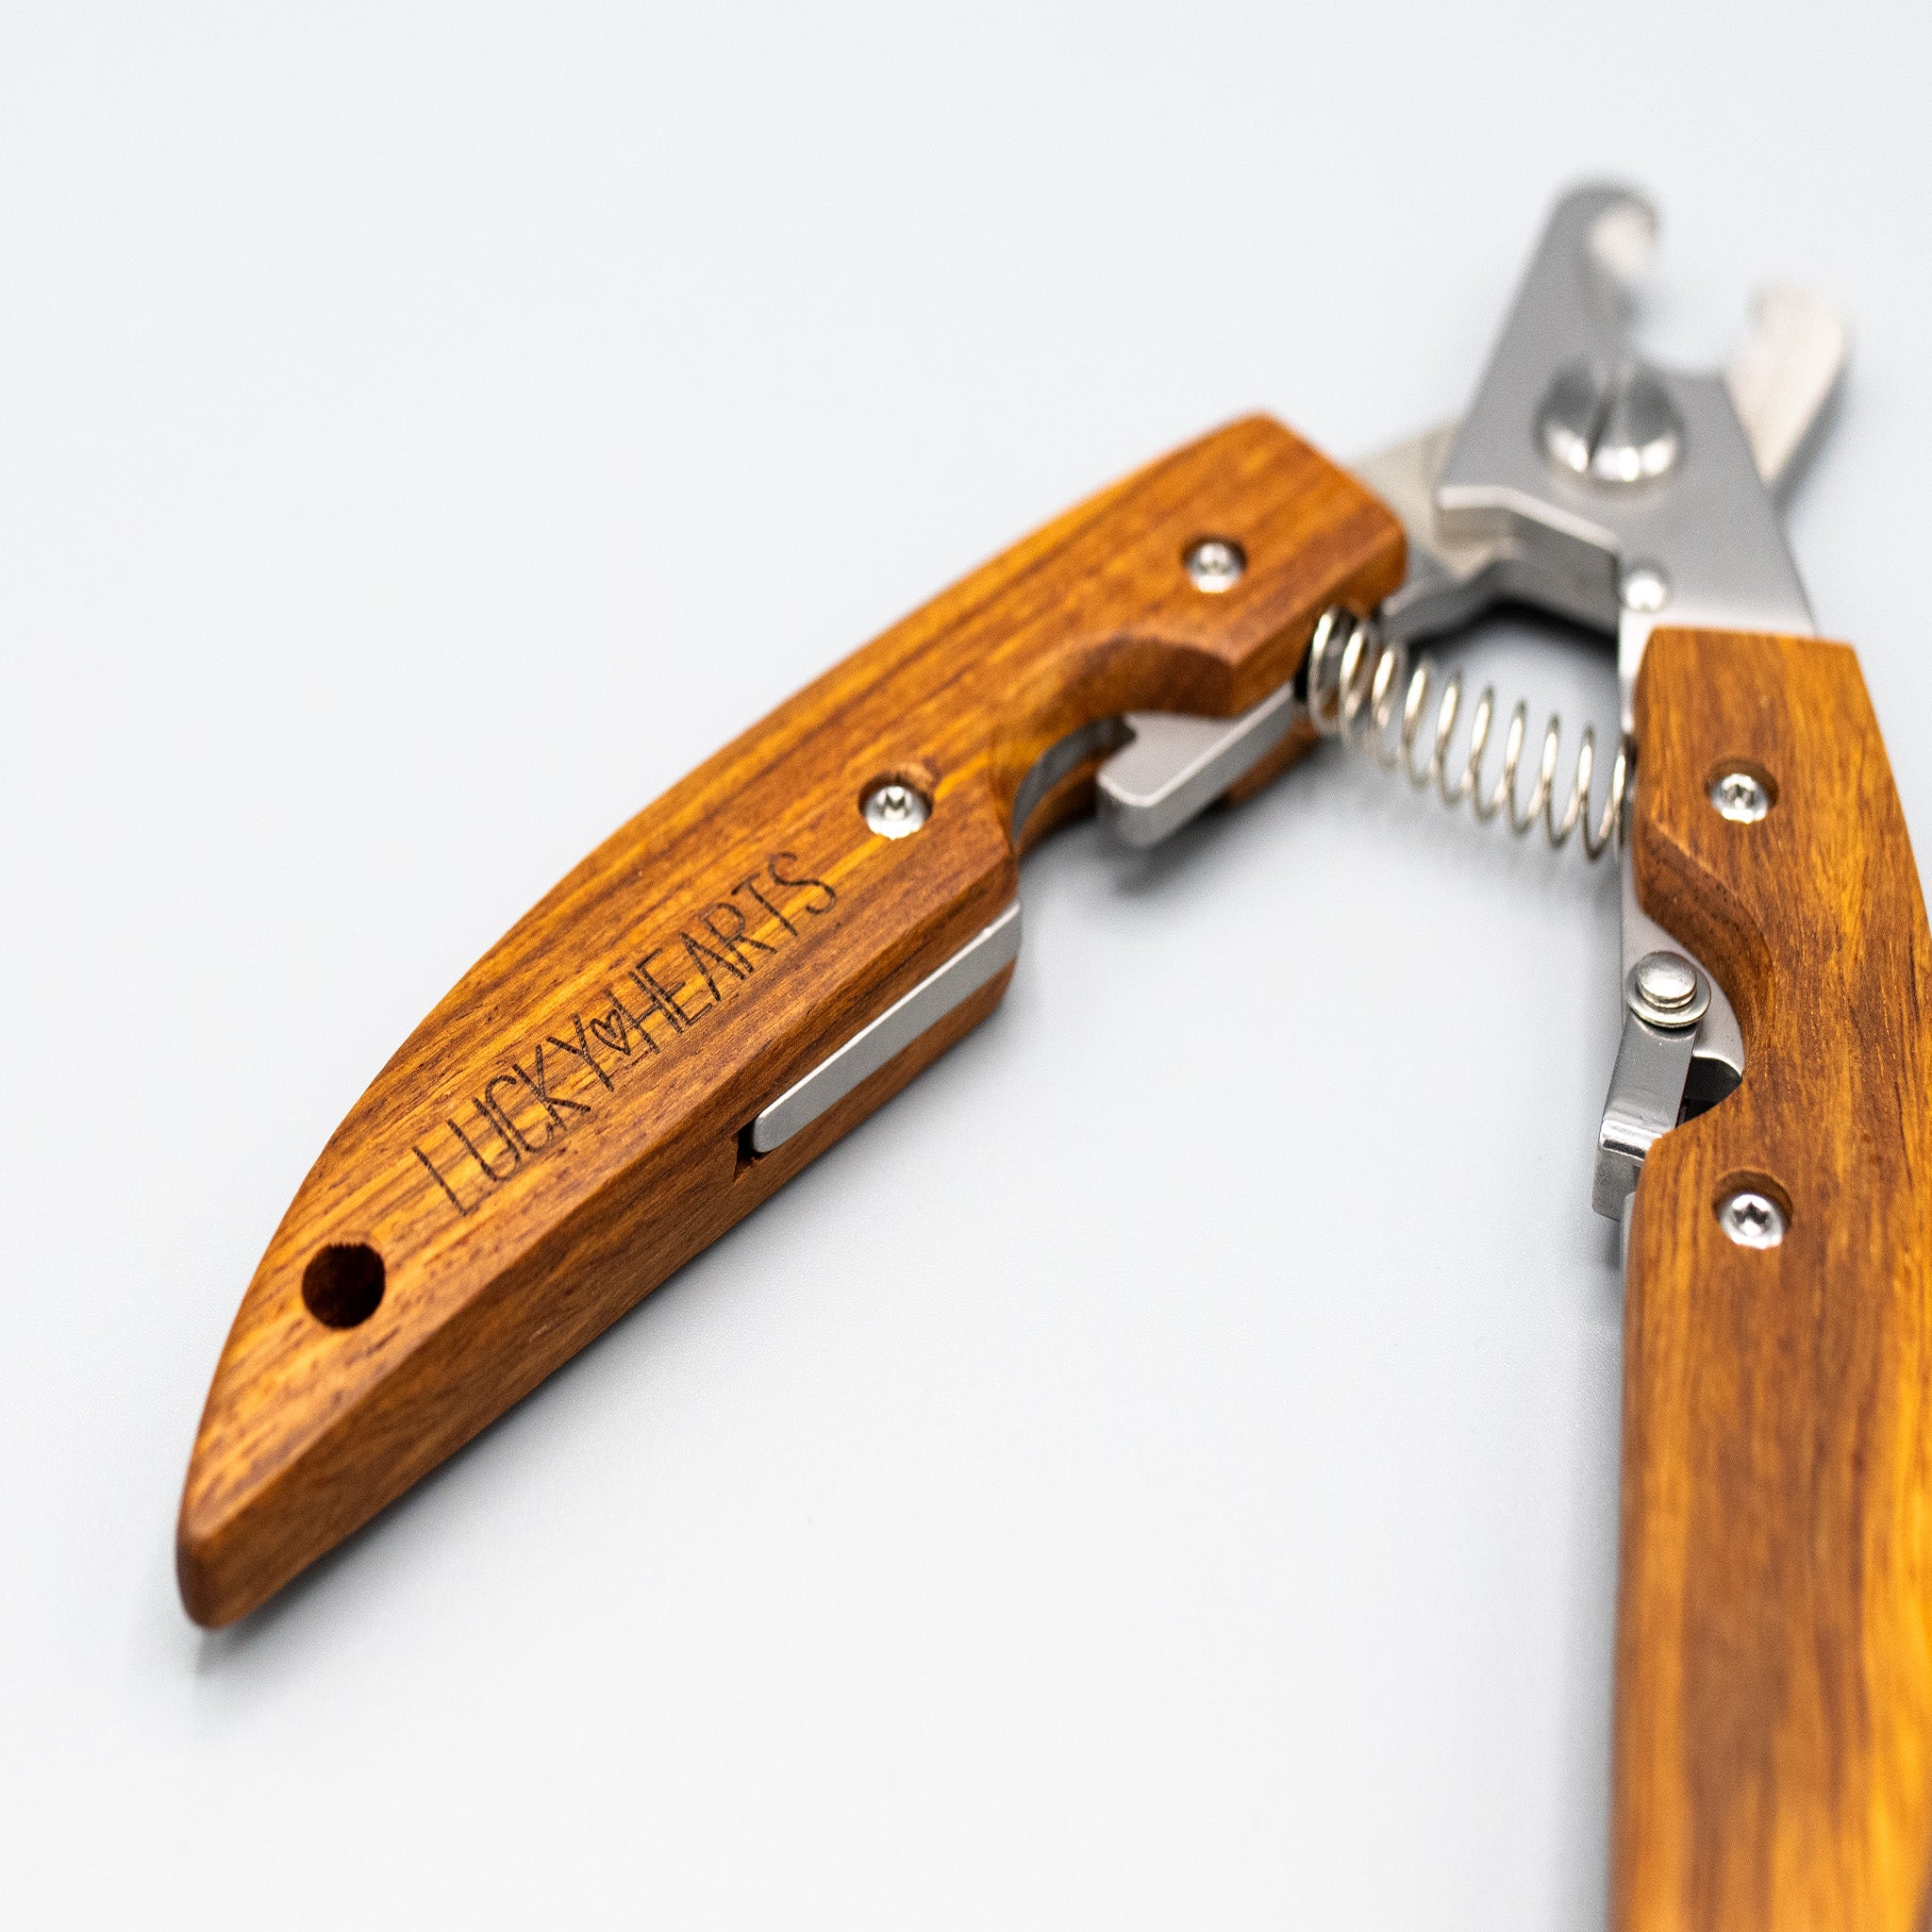 Premium claw pliers with wooden handle